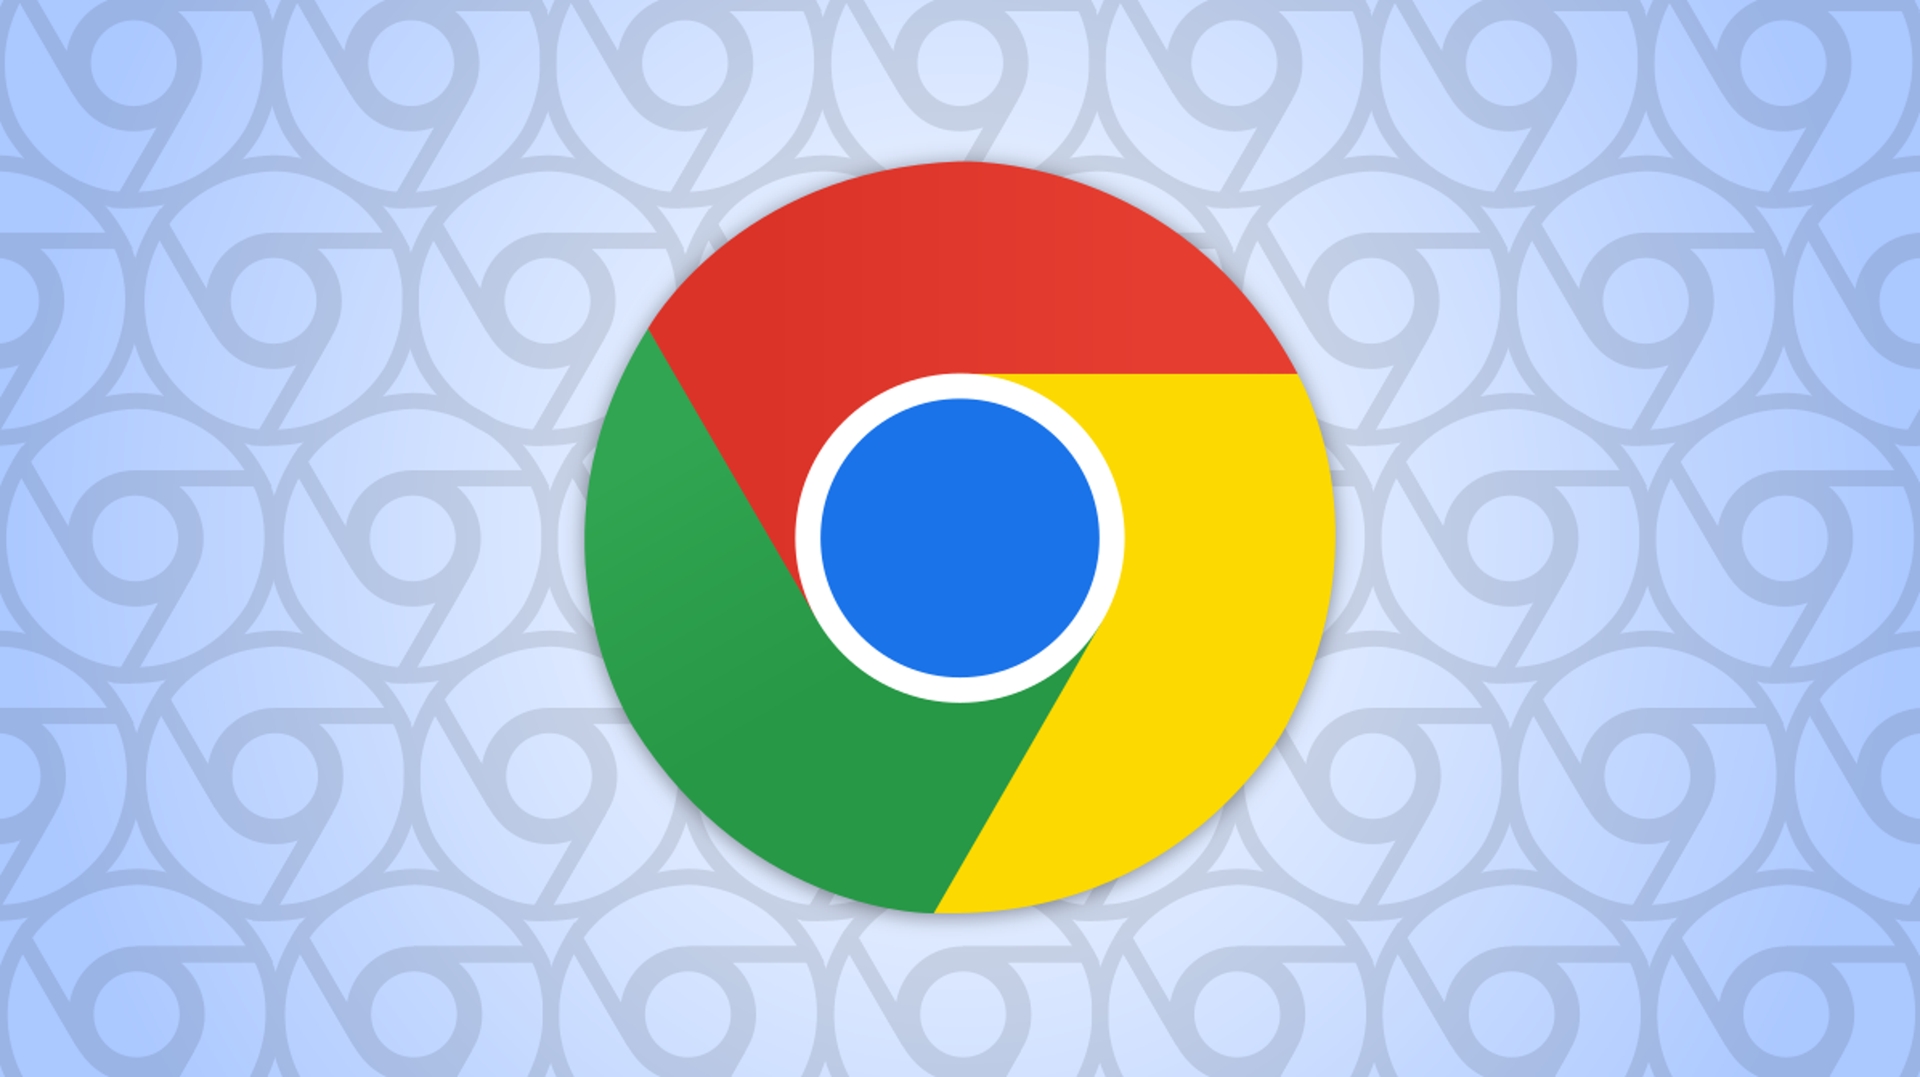 A new Google Chrome security vulnerability has been discovered and users of the popular browser need to update their browser as soon as possible, so they don't get affected.